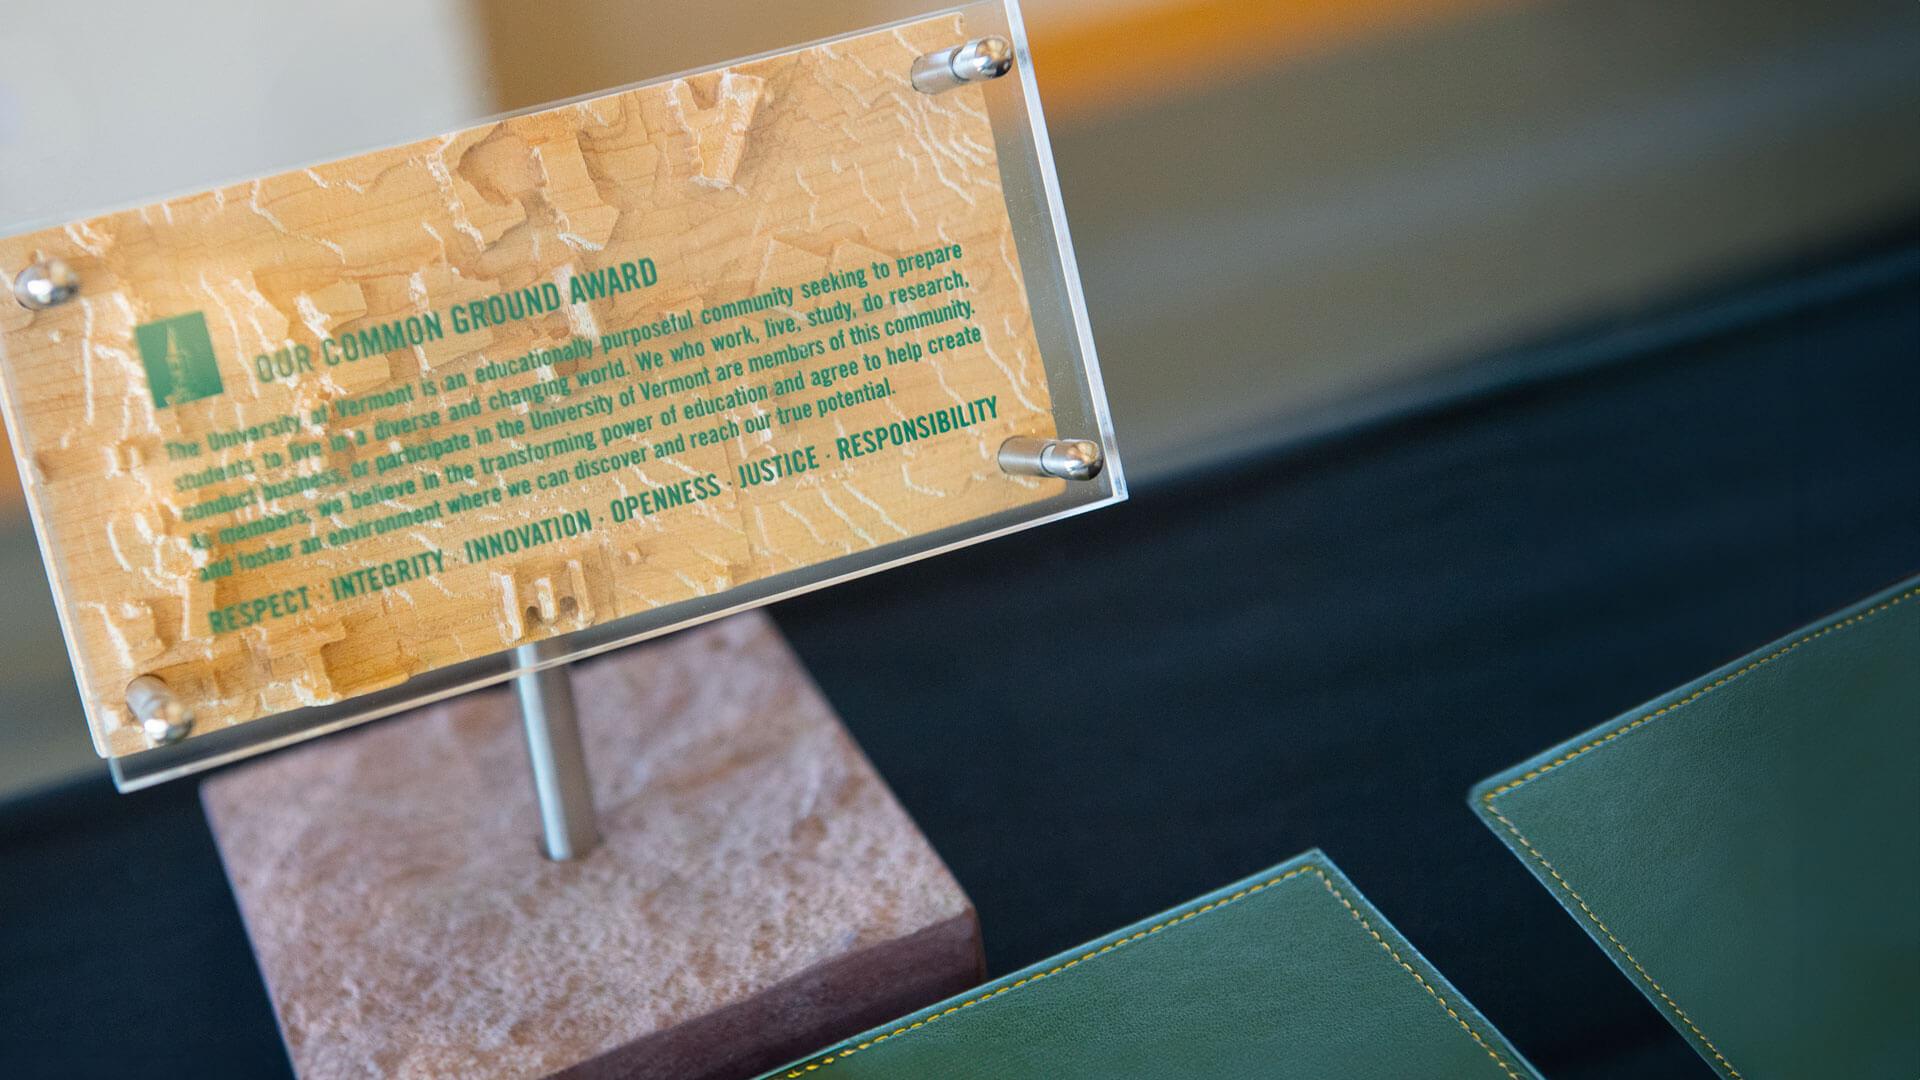 close up of a wooden our common ground award on a table